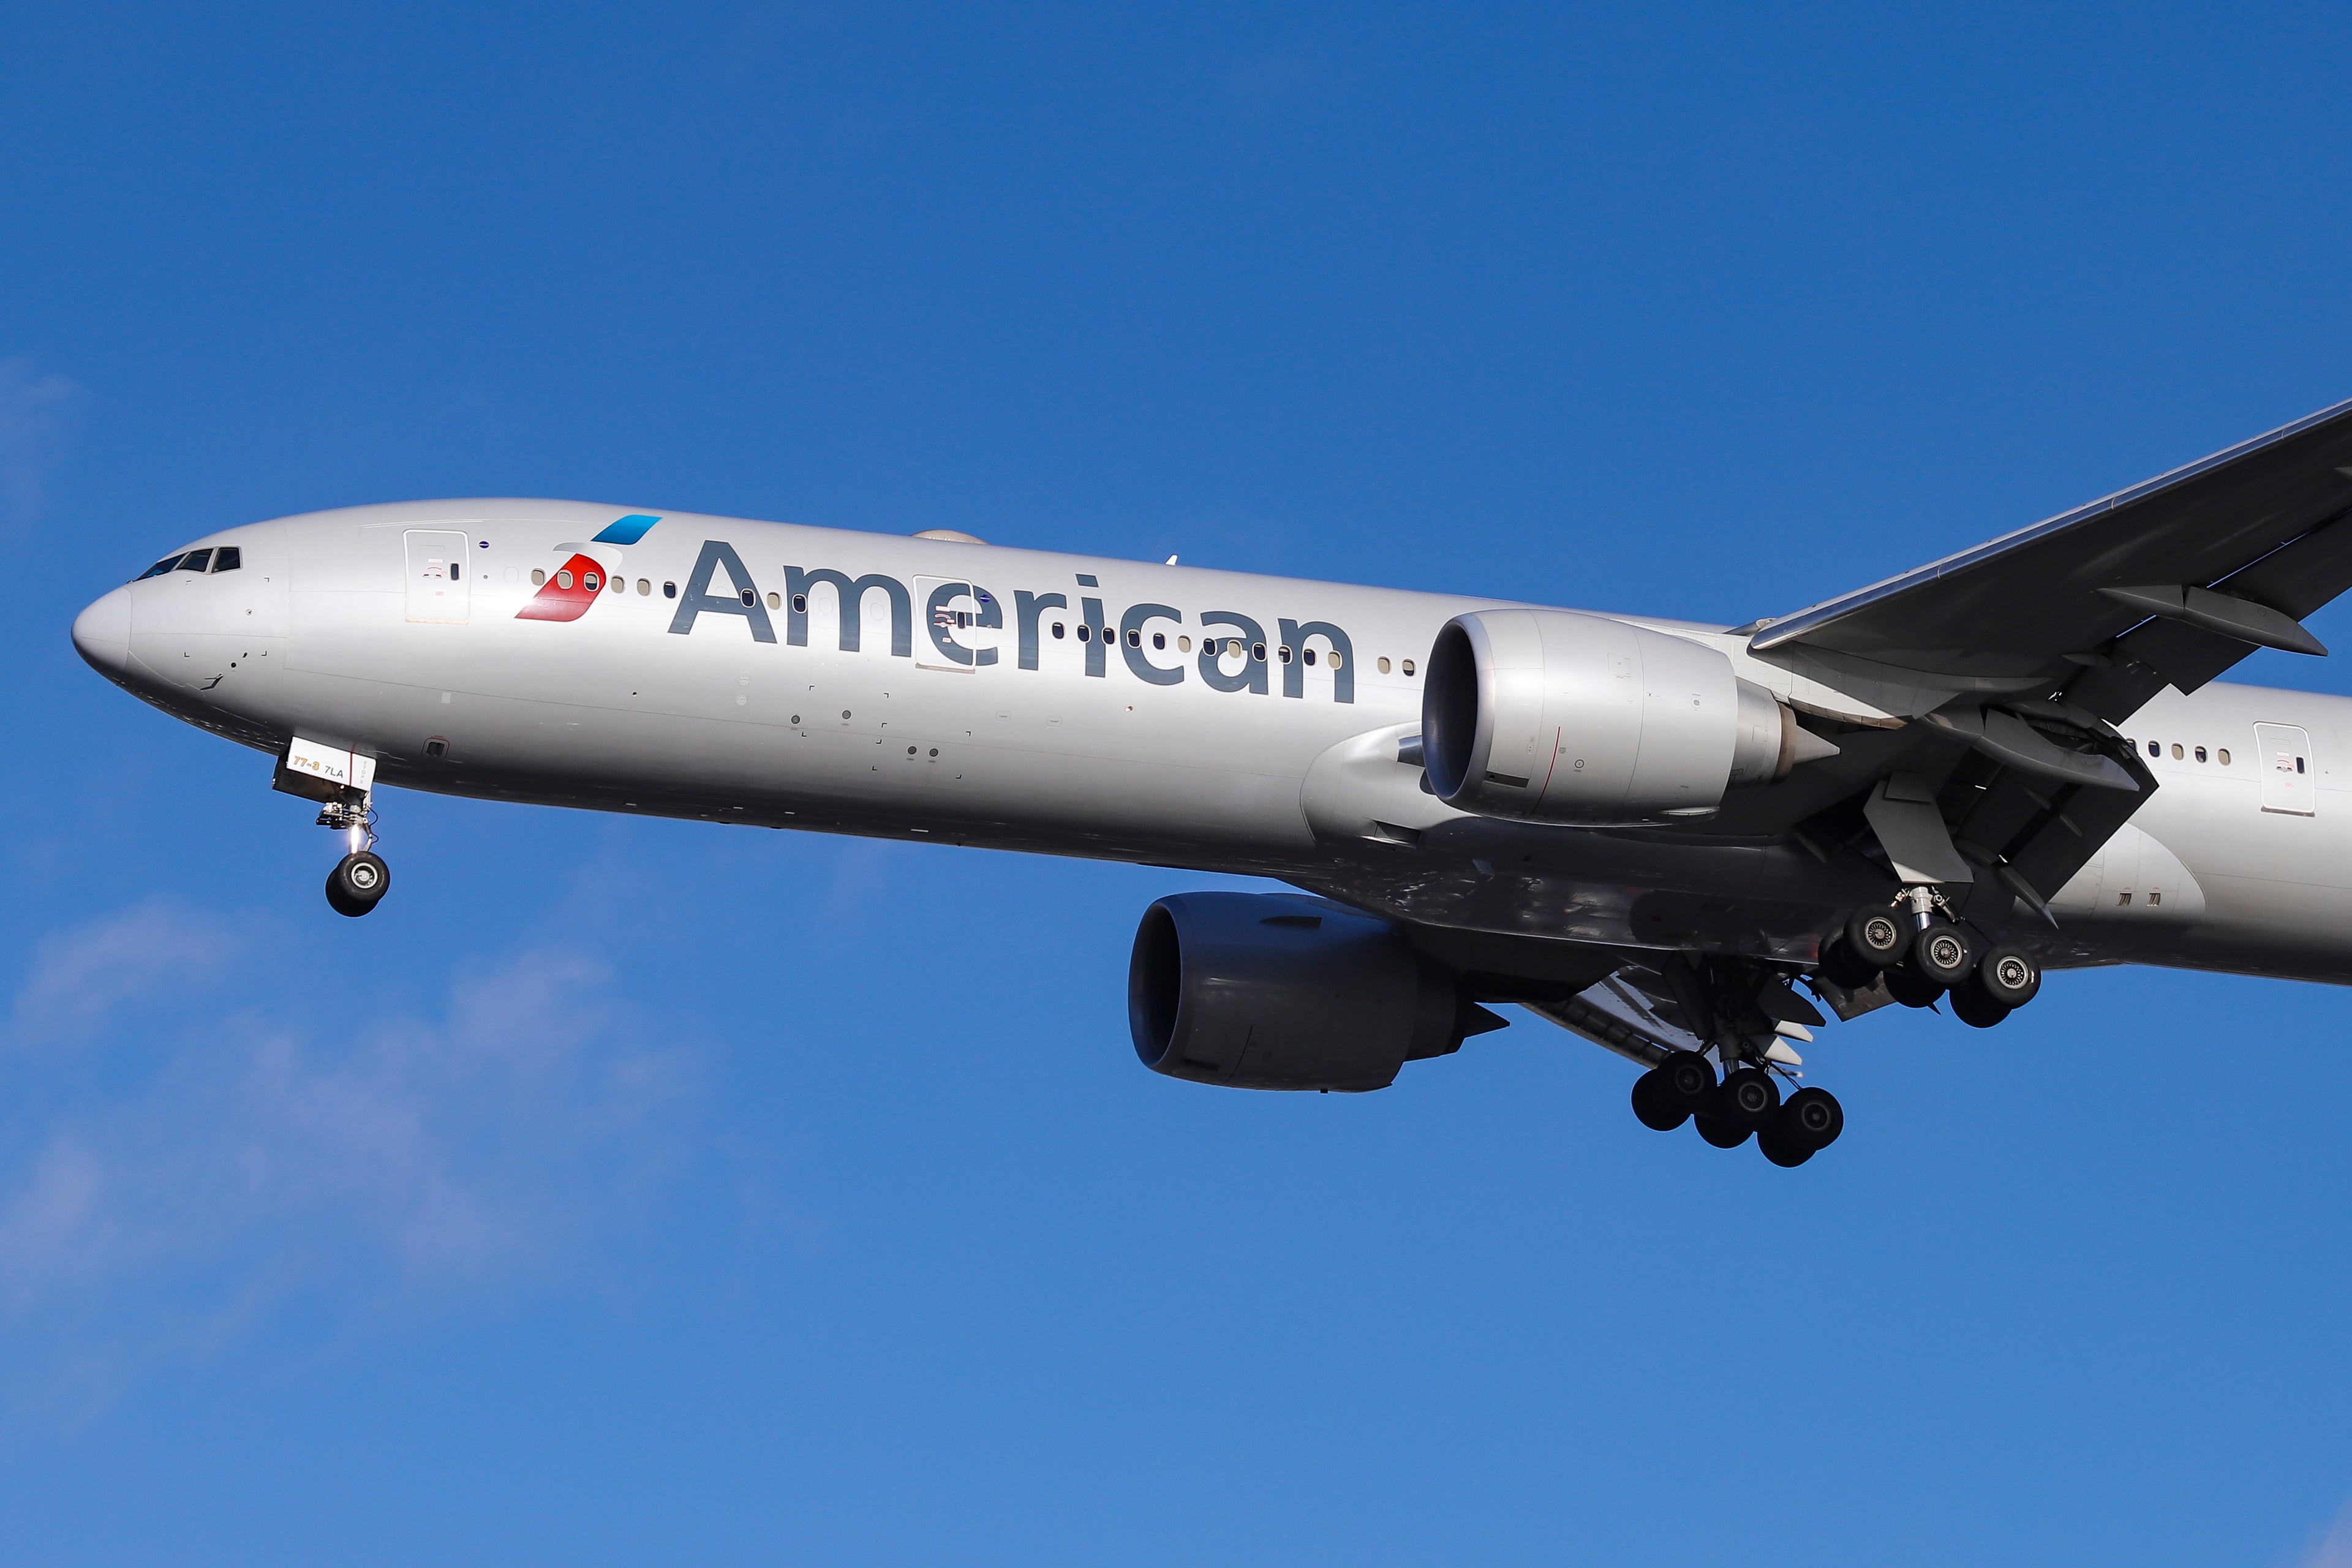 American Airlines Boeing 777-300 with registration N717AN is